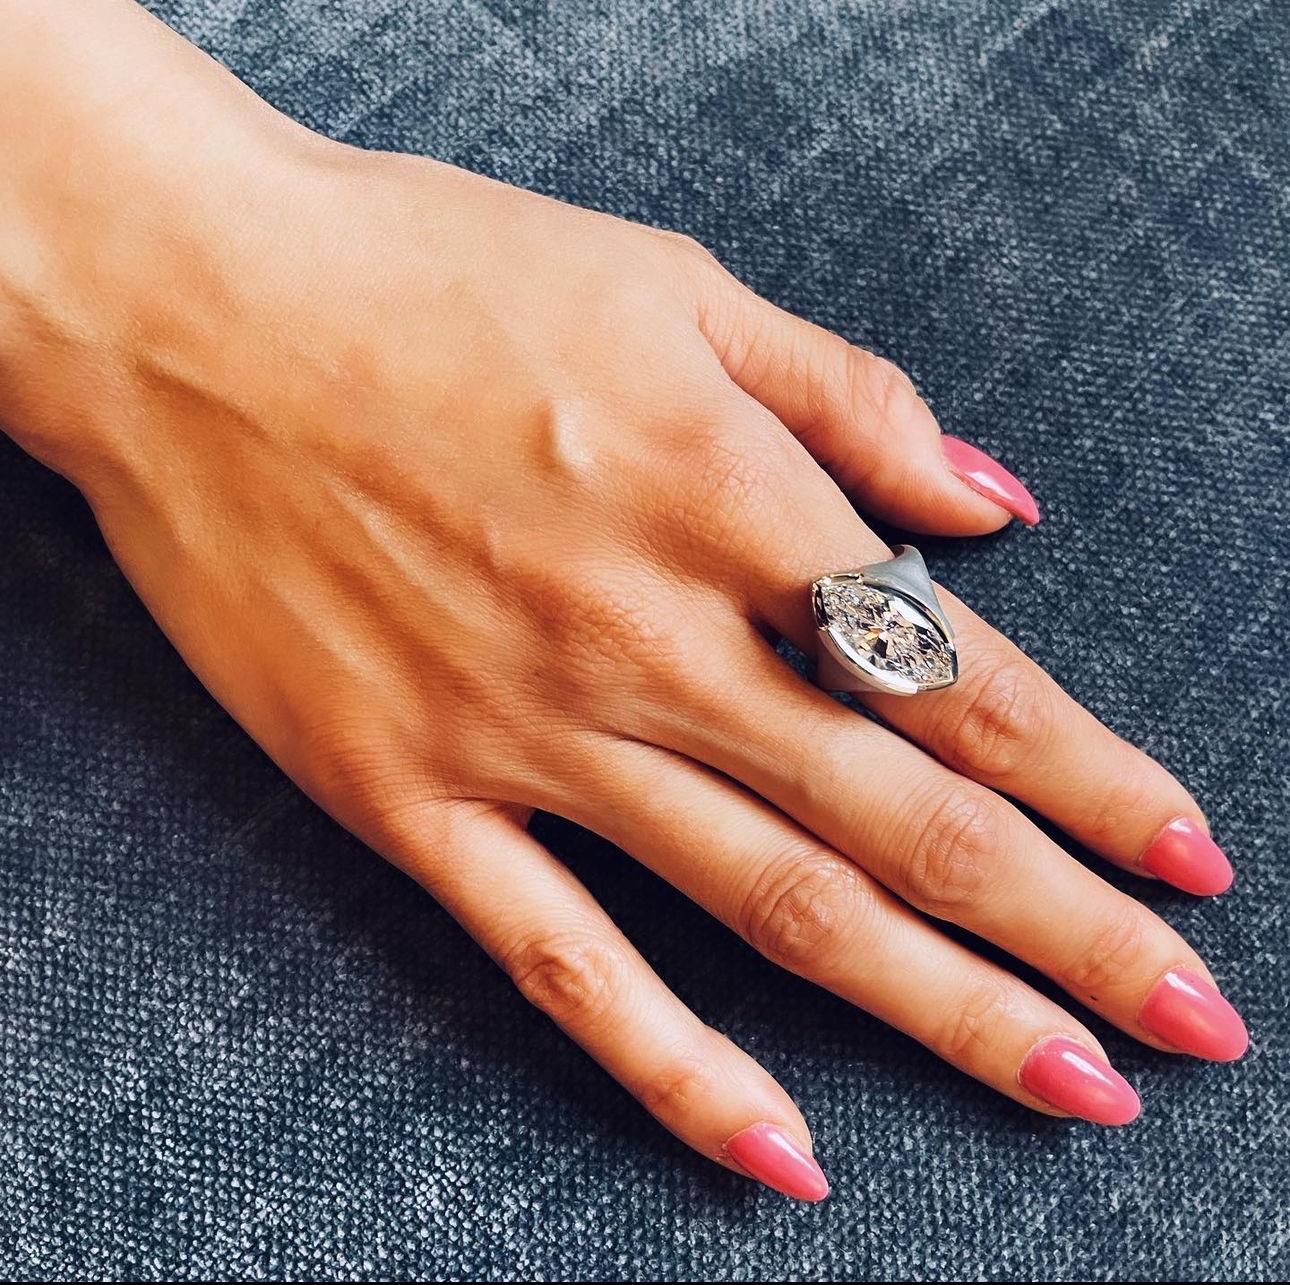 Maximum minimalism in a sleek, diamond solitaire statement ring from Geoffrey Good.

Featuring a single GIA-certified natural Diamond of 6.01 carats, mounted in our exclusive émerge-style setting designed to showcase the full brilliance of the